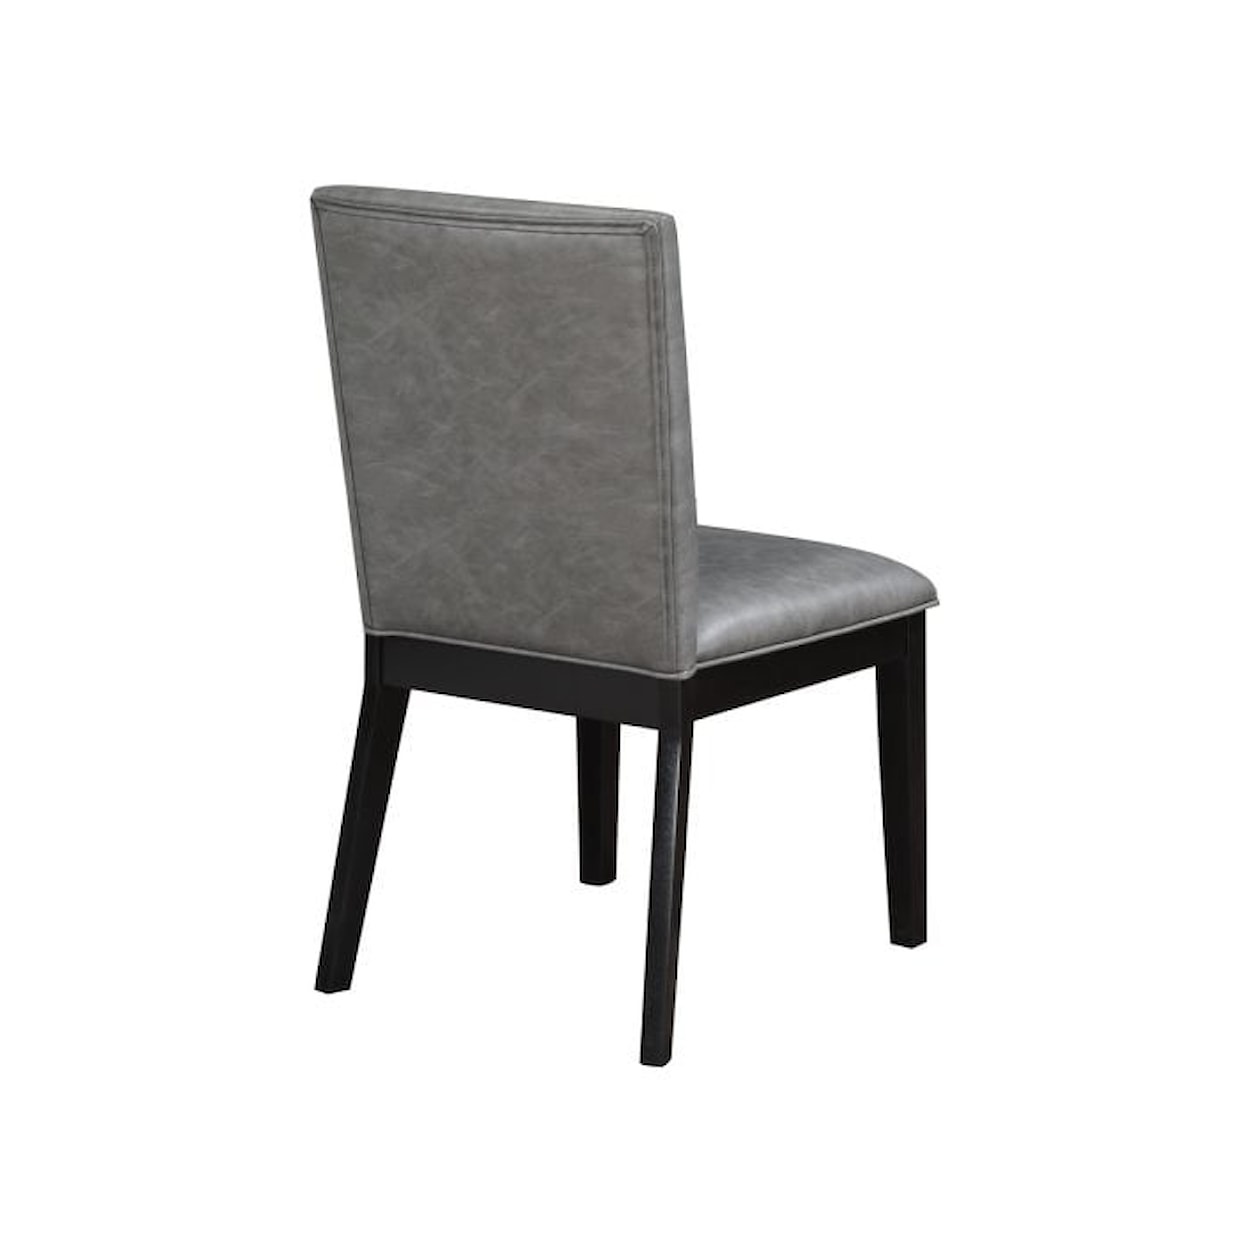 Prime Amy Amy Side Chair